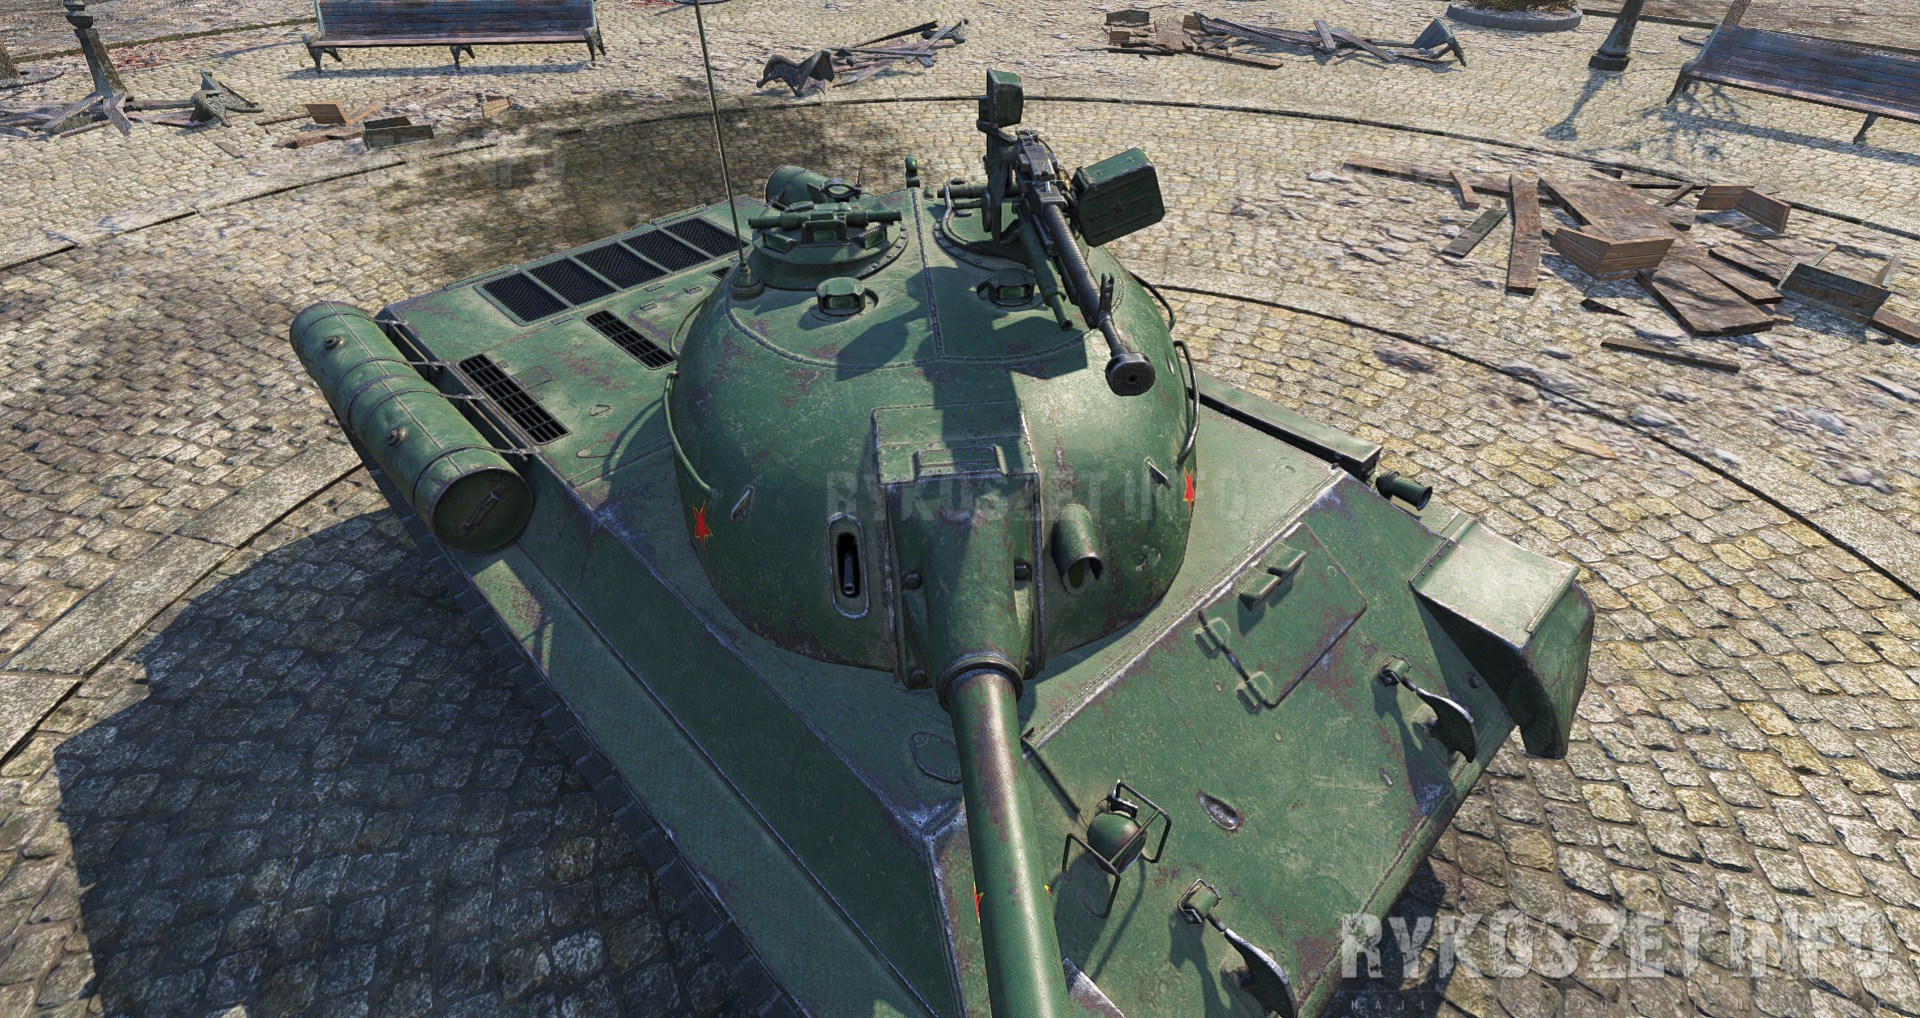 world of tanks blitz what tier is chinese t-34-1